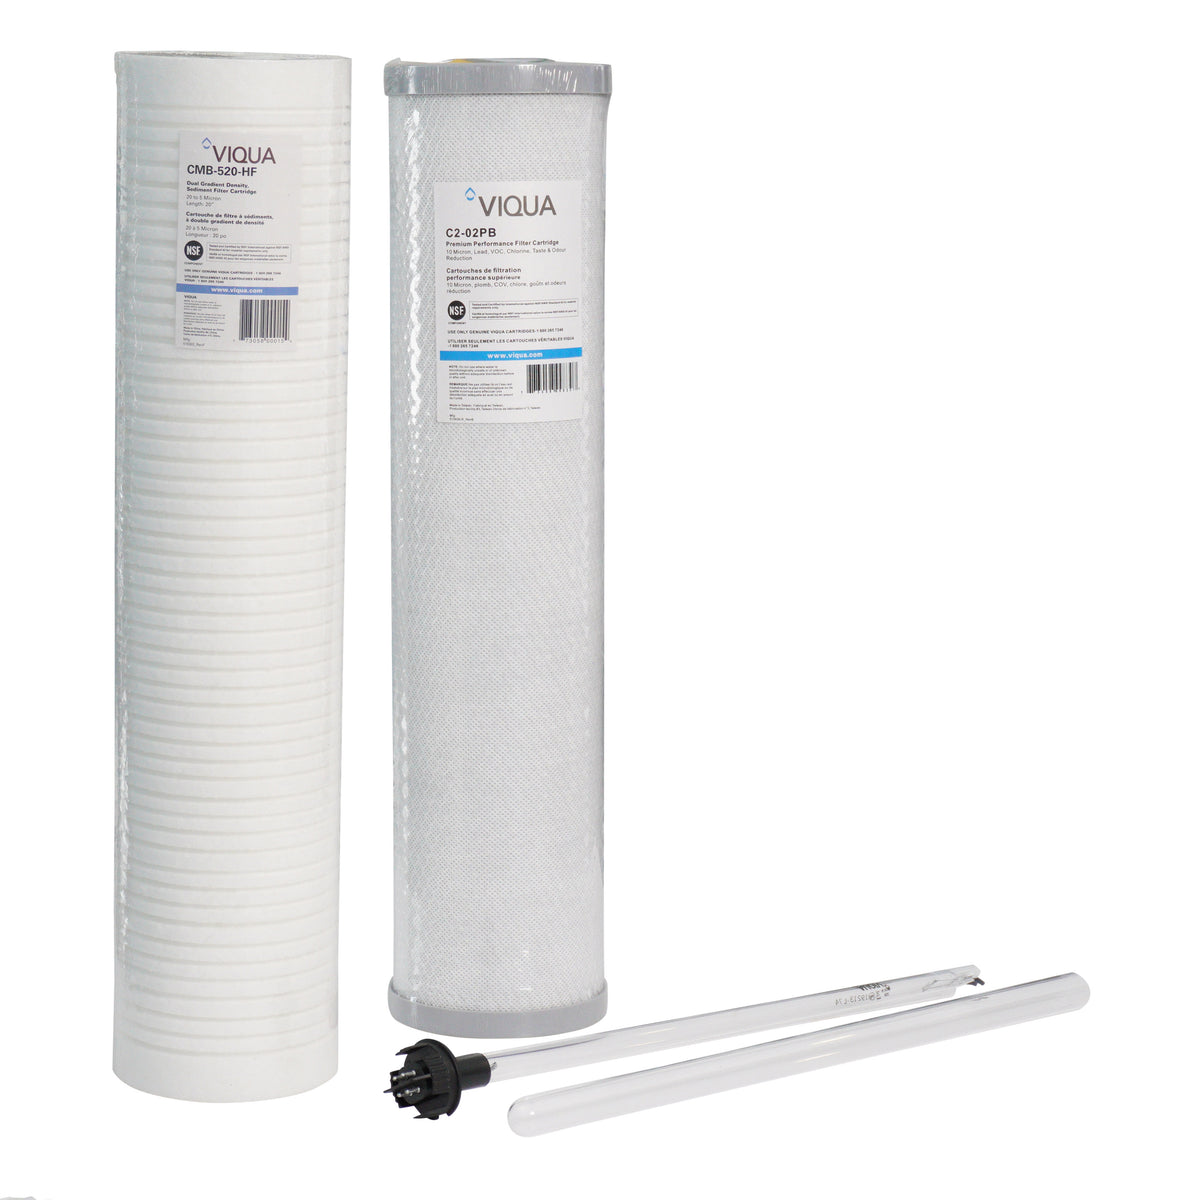 Viqua IHS22-D4 Replacement UV Lamp, Sleeve and Filters